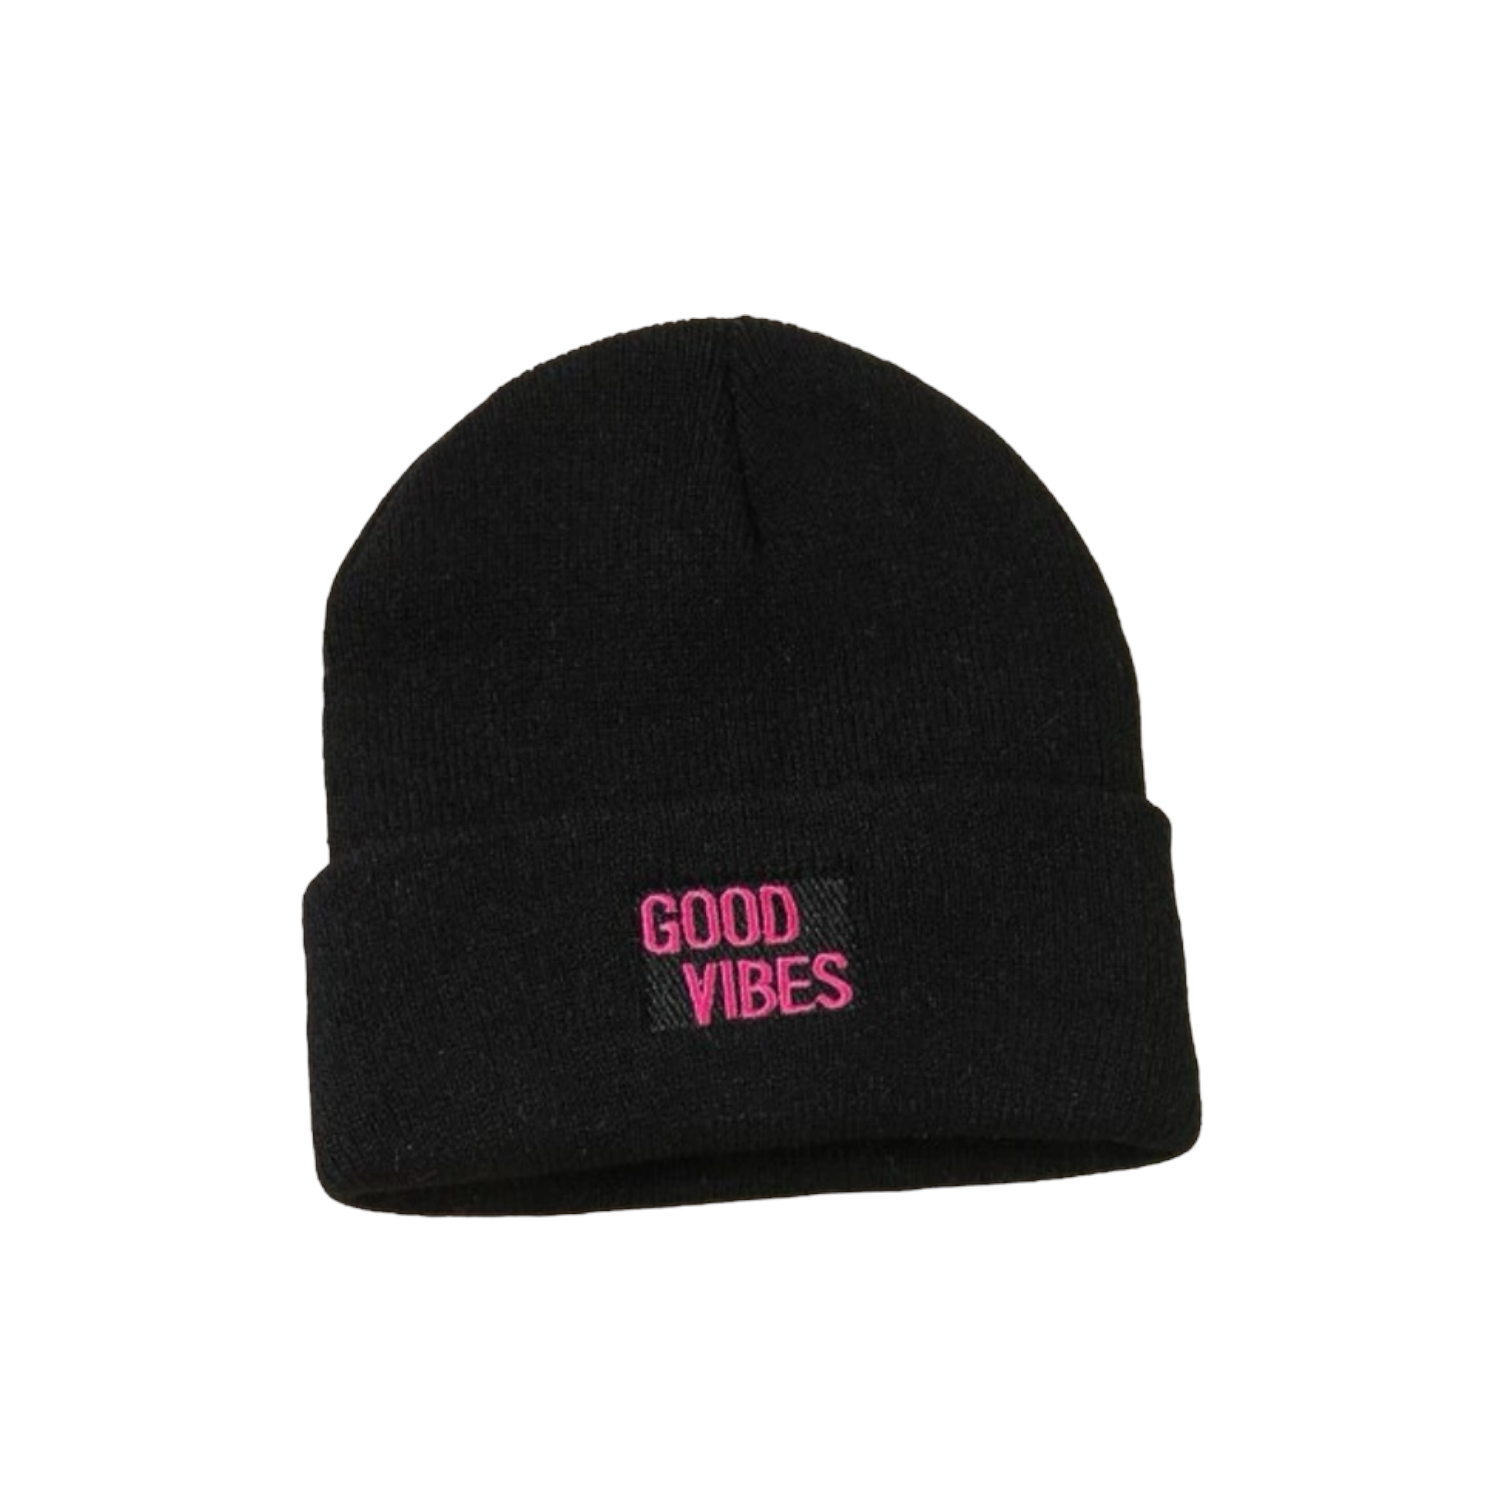 Good vibes beanie hats - color White, Black - TheSinners2Saints